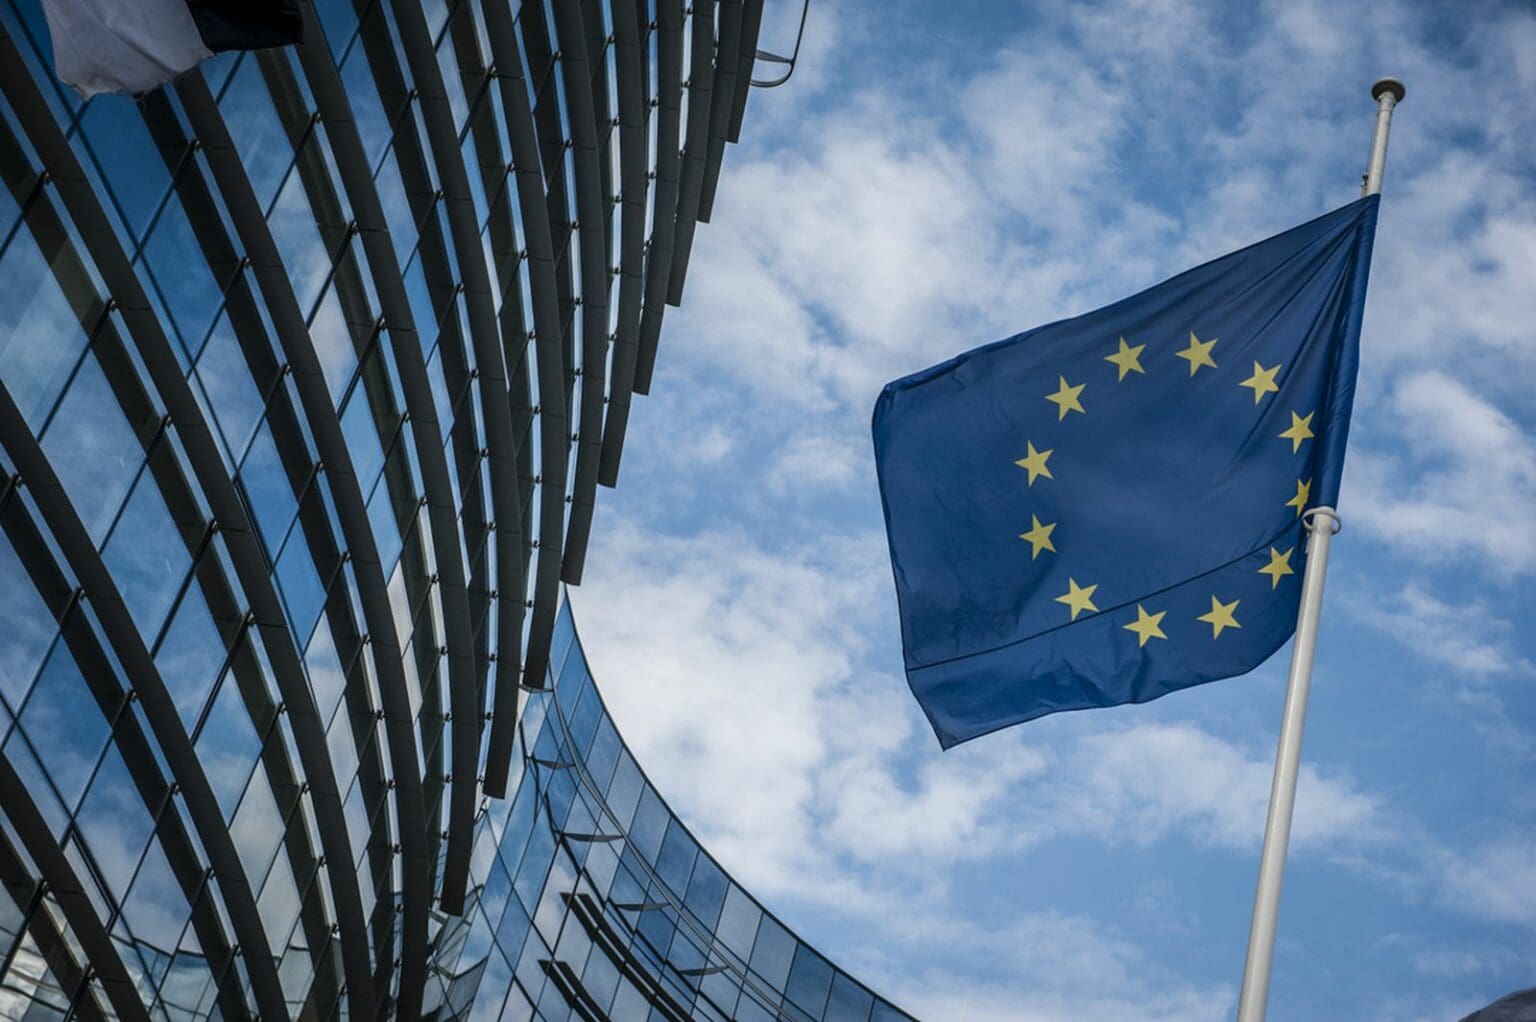 The European Commission's draft law could force companies to detect, remove and report CSAM.